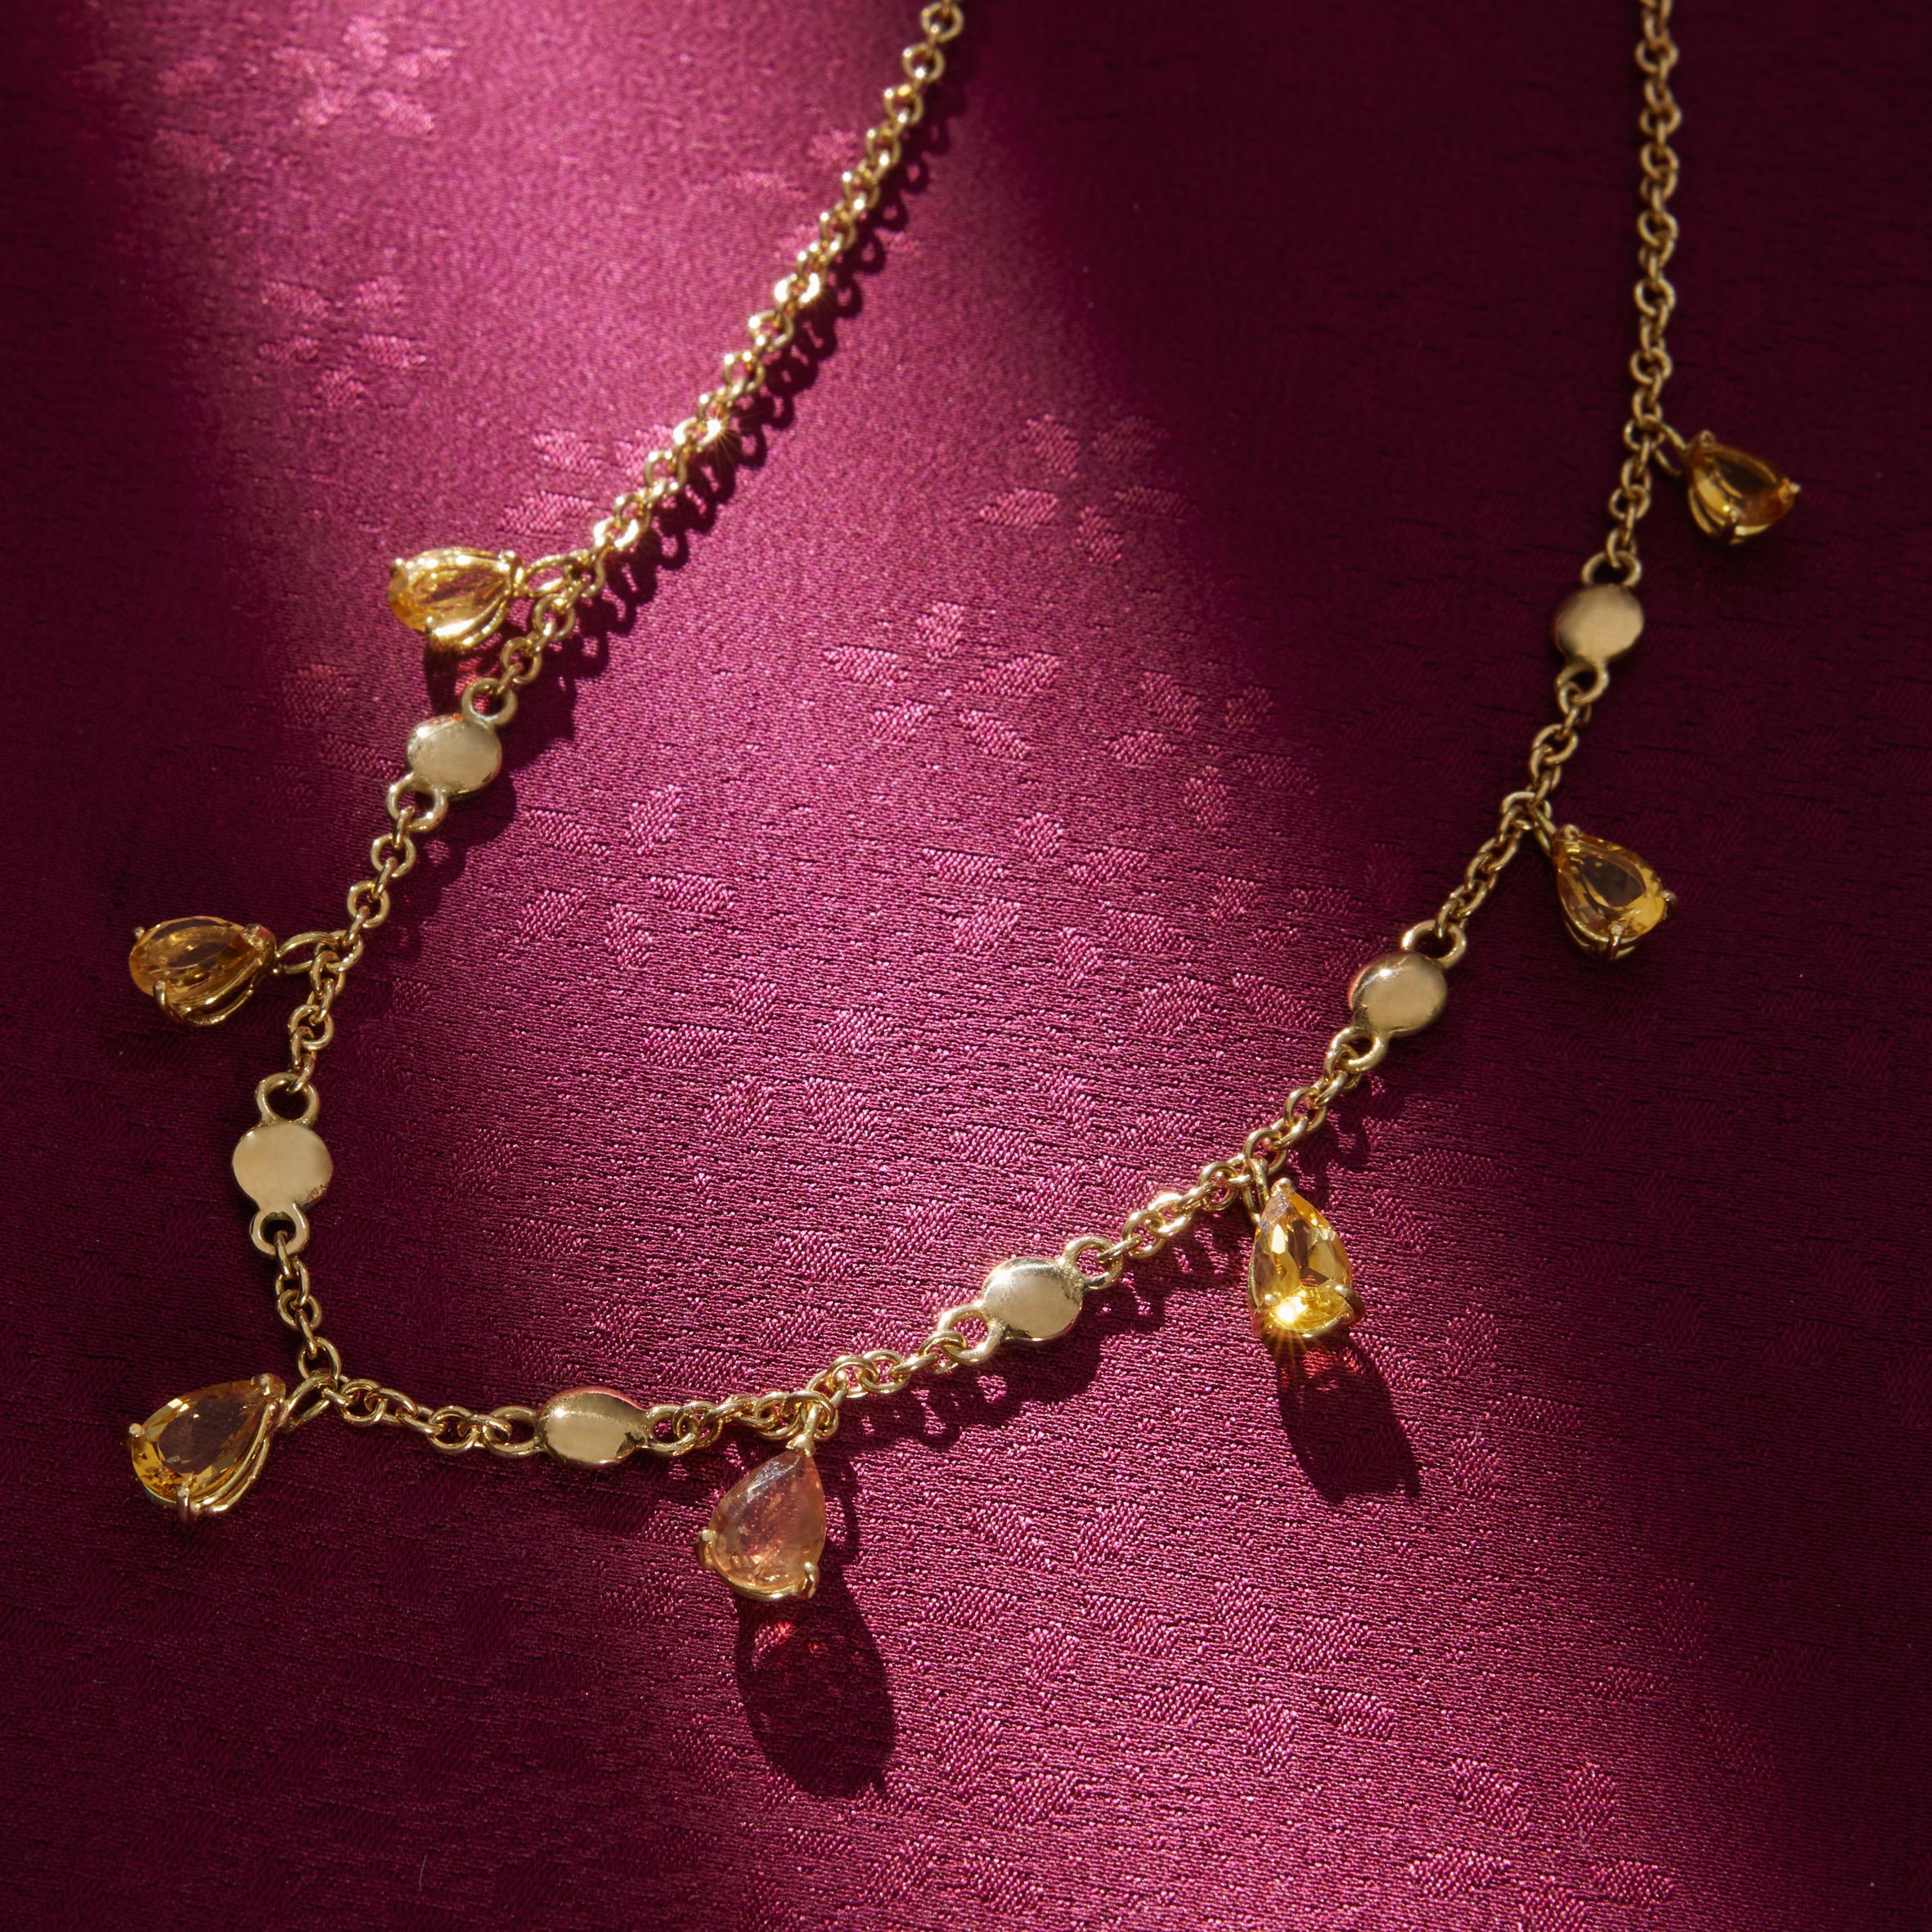 This drop necklace is all made by hand the total lenght is 45 cm is 21gr of 18k gold the yellow saffire drops is alternating with gold lentils.
All Giulia Colussi jewelry is new and has never been previously owned or worn. Each item will arrive at